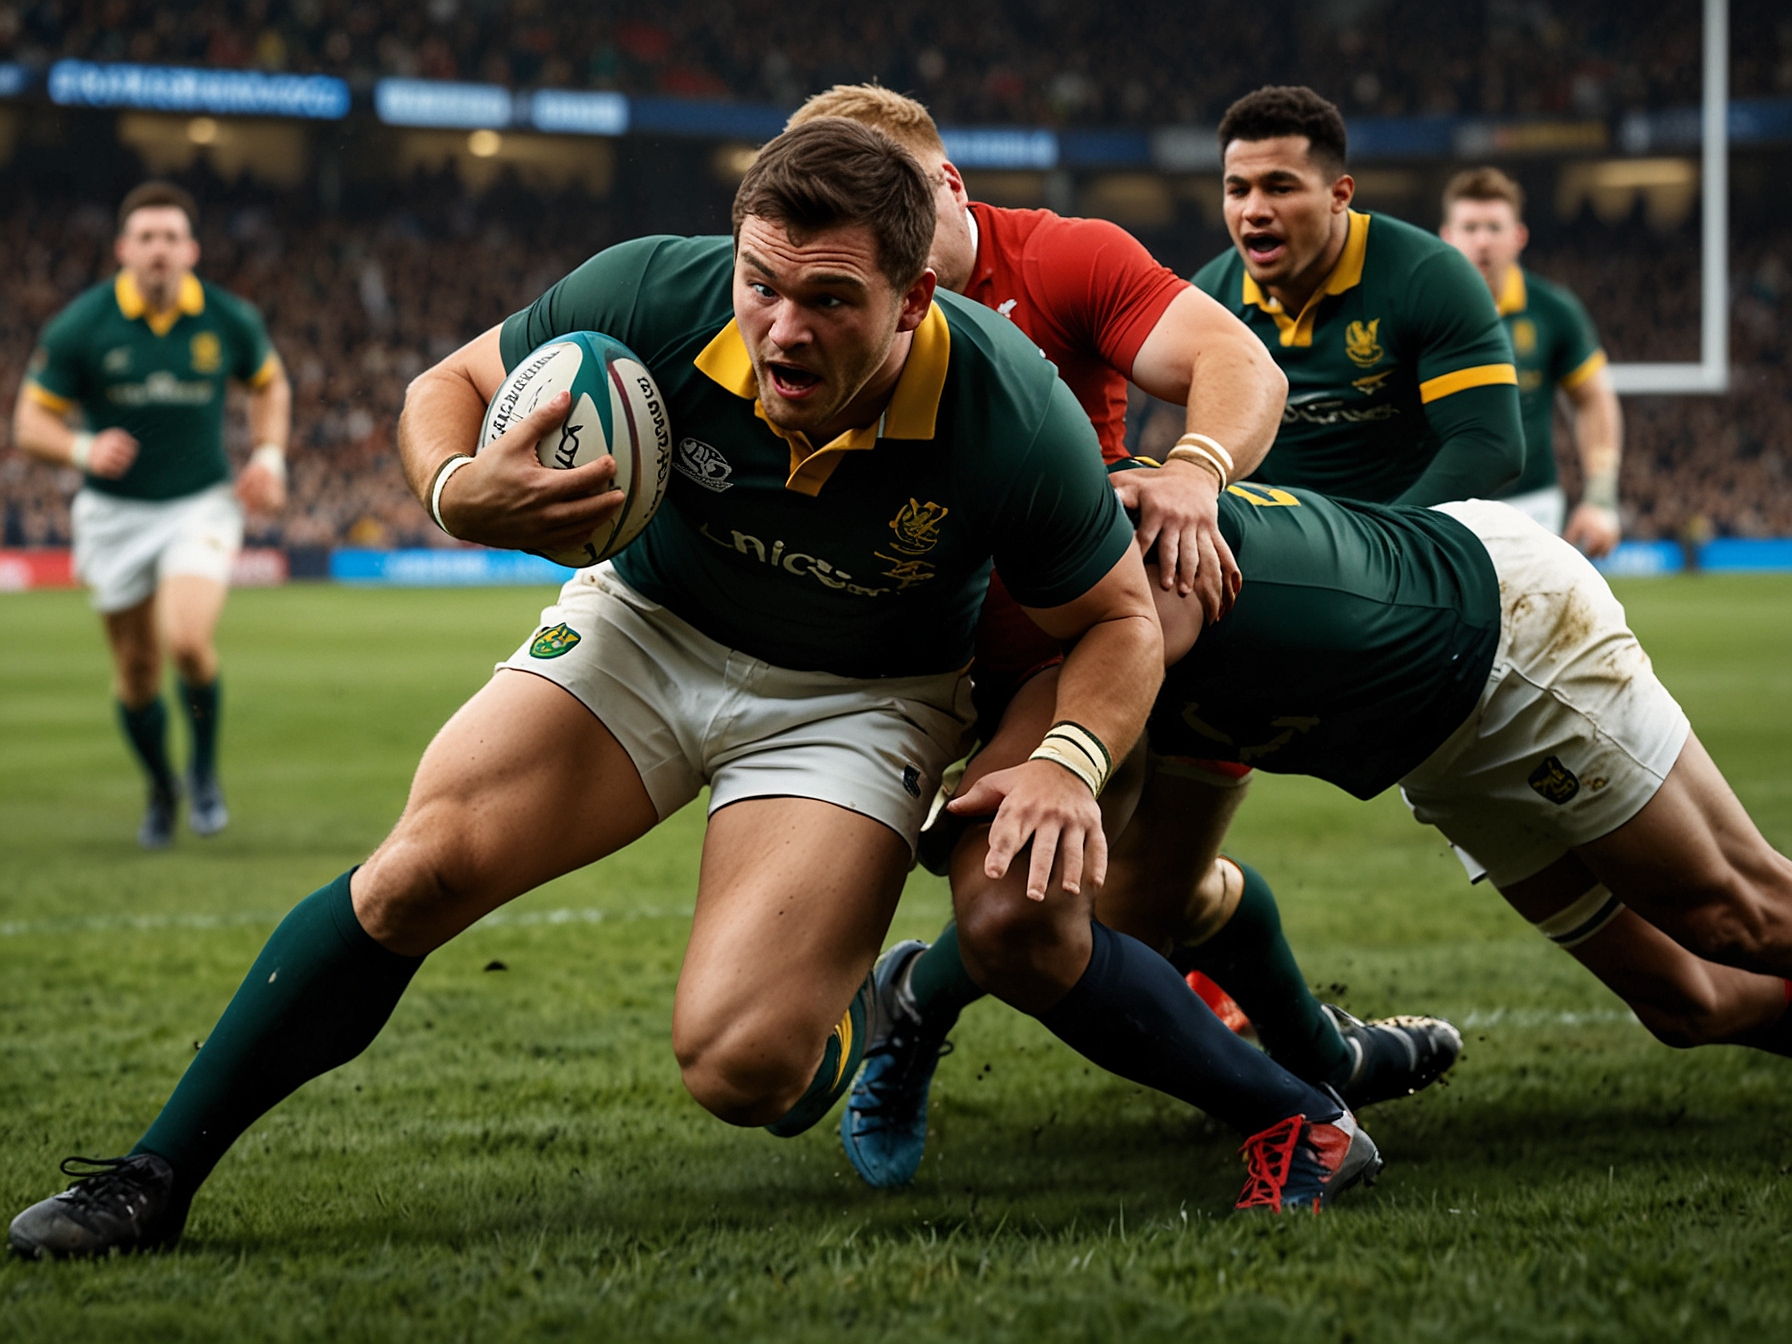 A high-intensity moment from a previous South Africa vs. Wales rugby match, showcasing the physical prowess and strategic gameplay of both teams.